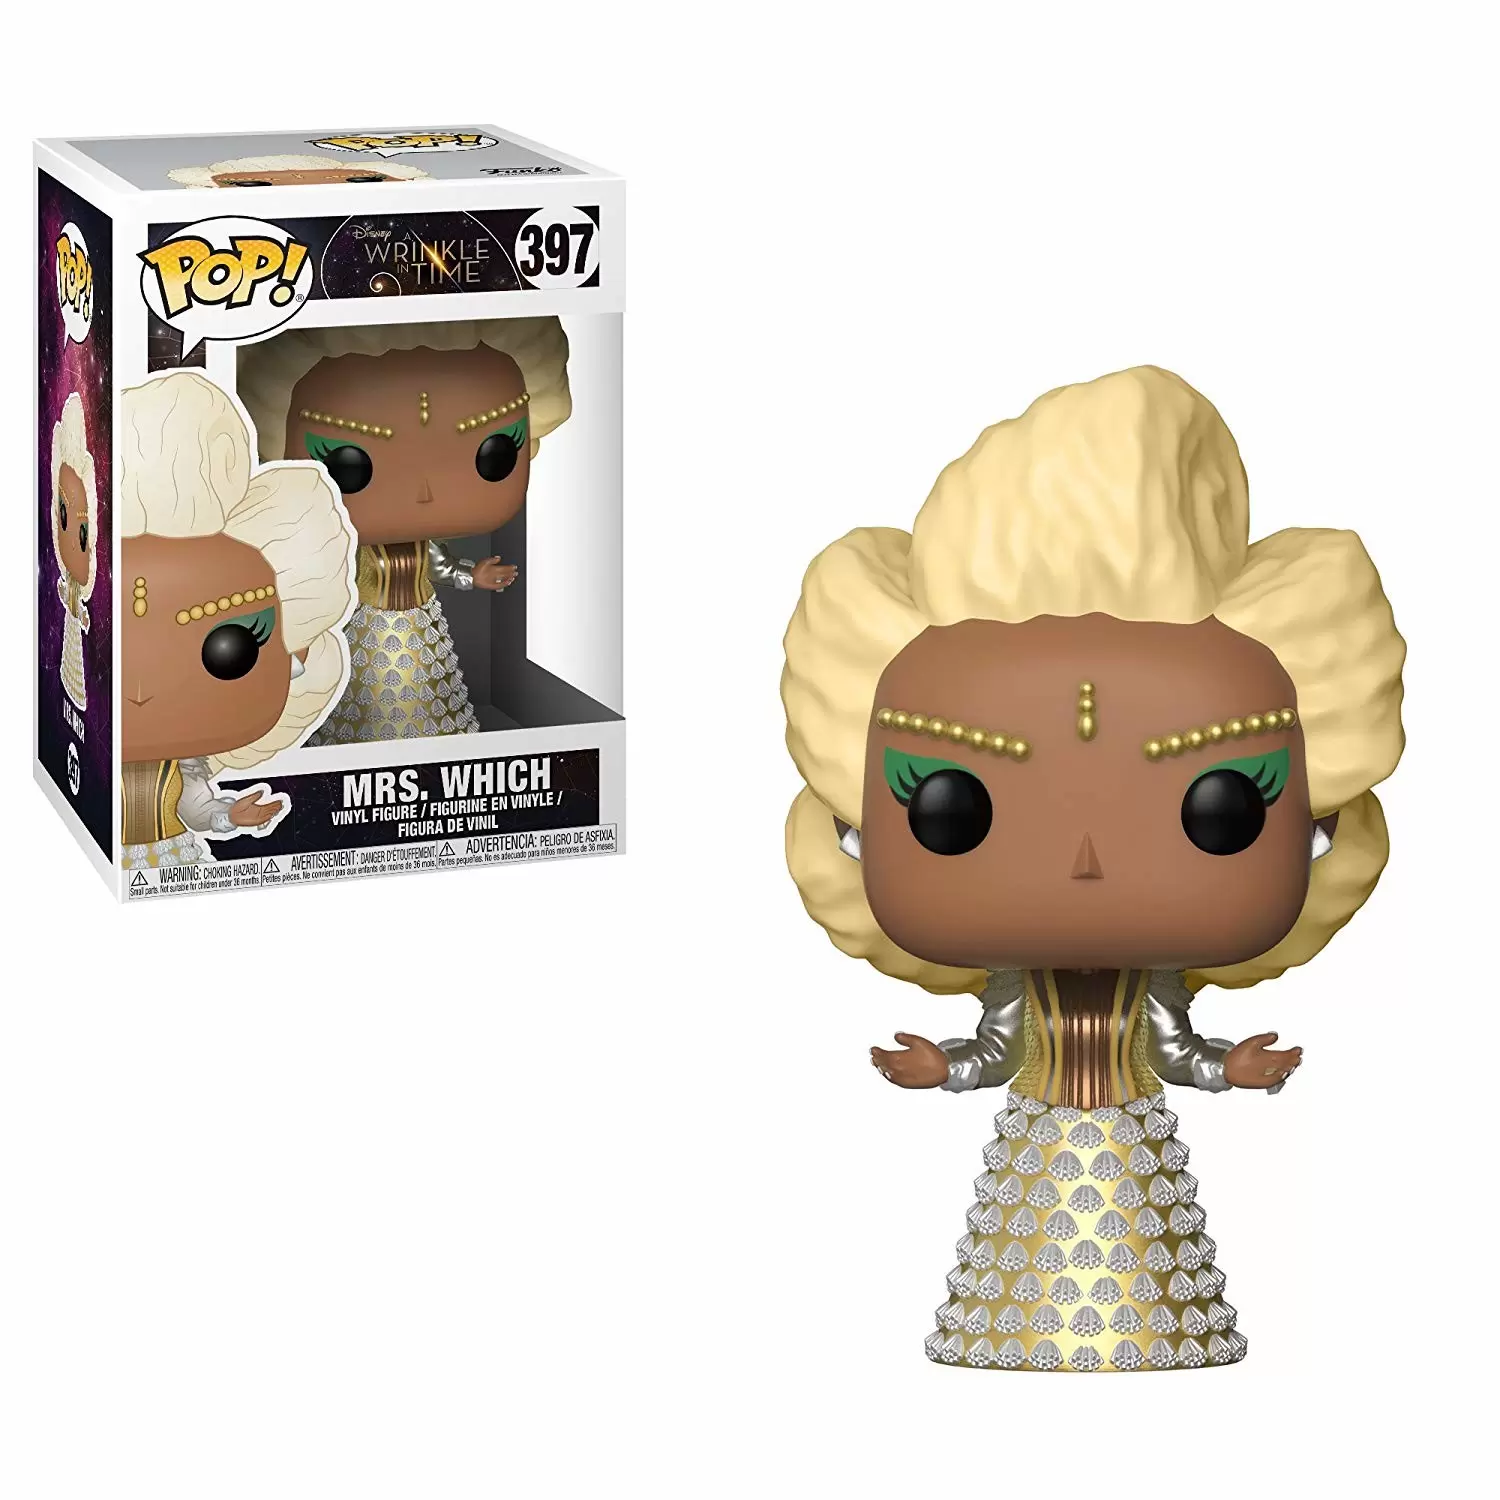 POP! Disney - A wrinkle in Time - Mrs. Which